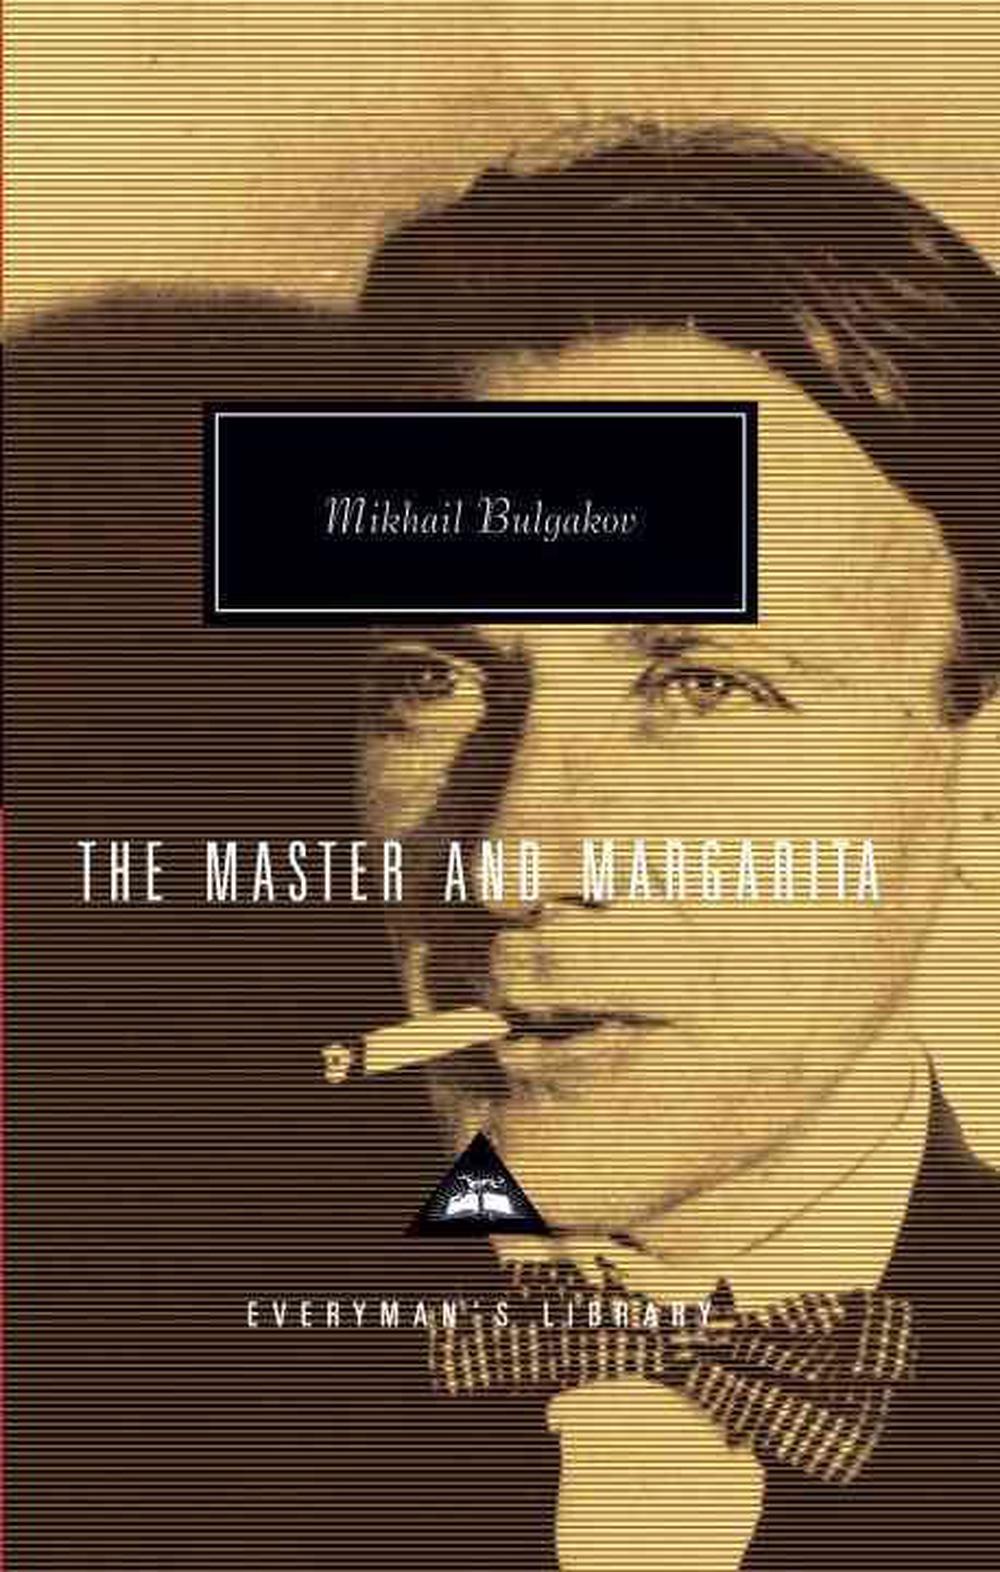 the master and margarita book